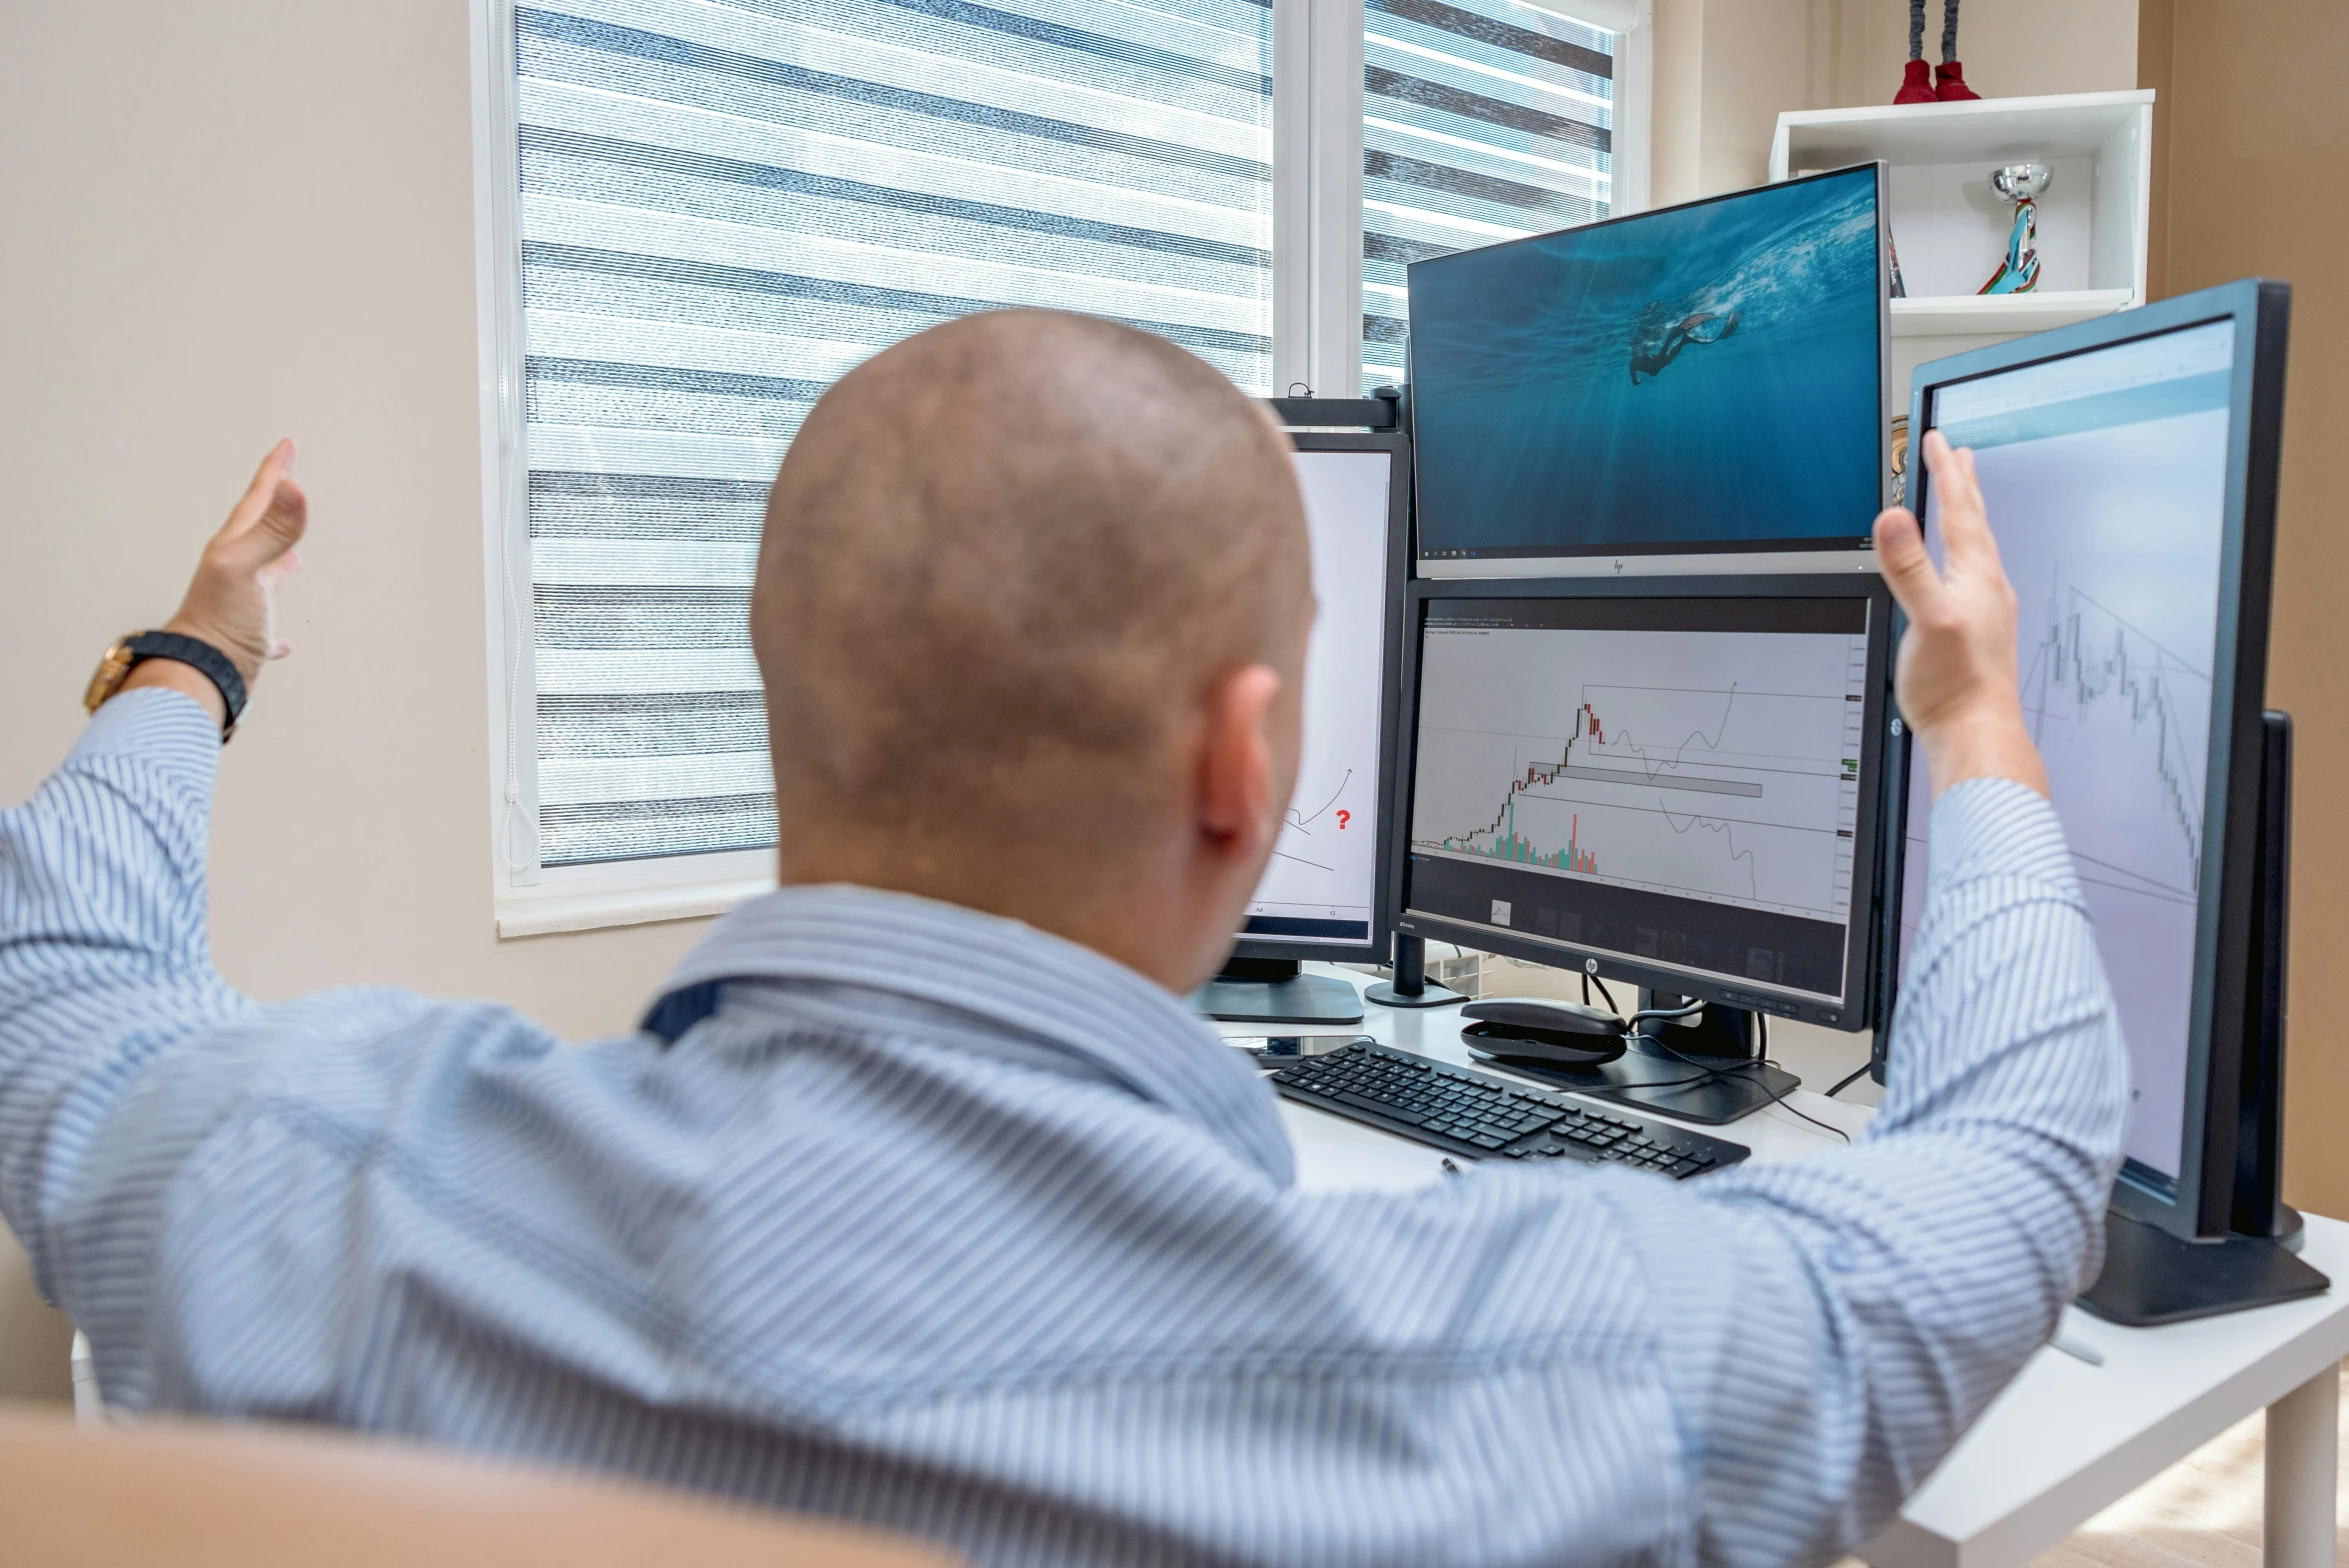 a man sitting at a desk in front of two computer monitors, a picture, by Adam Marczyński, fish in the background, avatar image, medical photography, manly